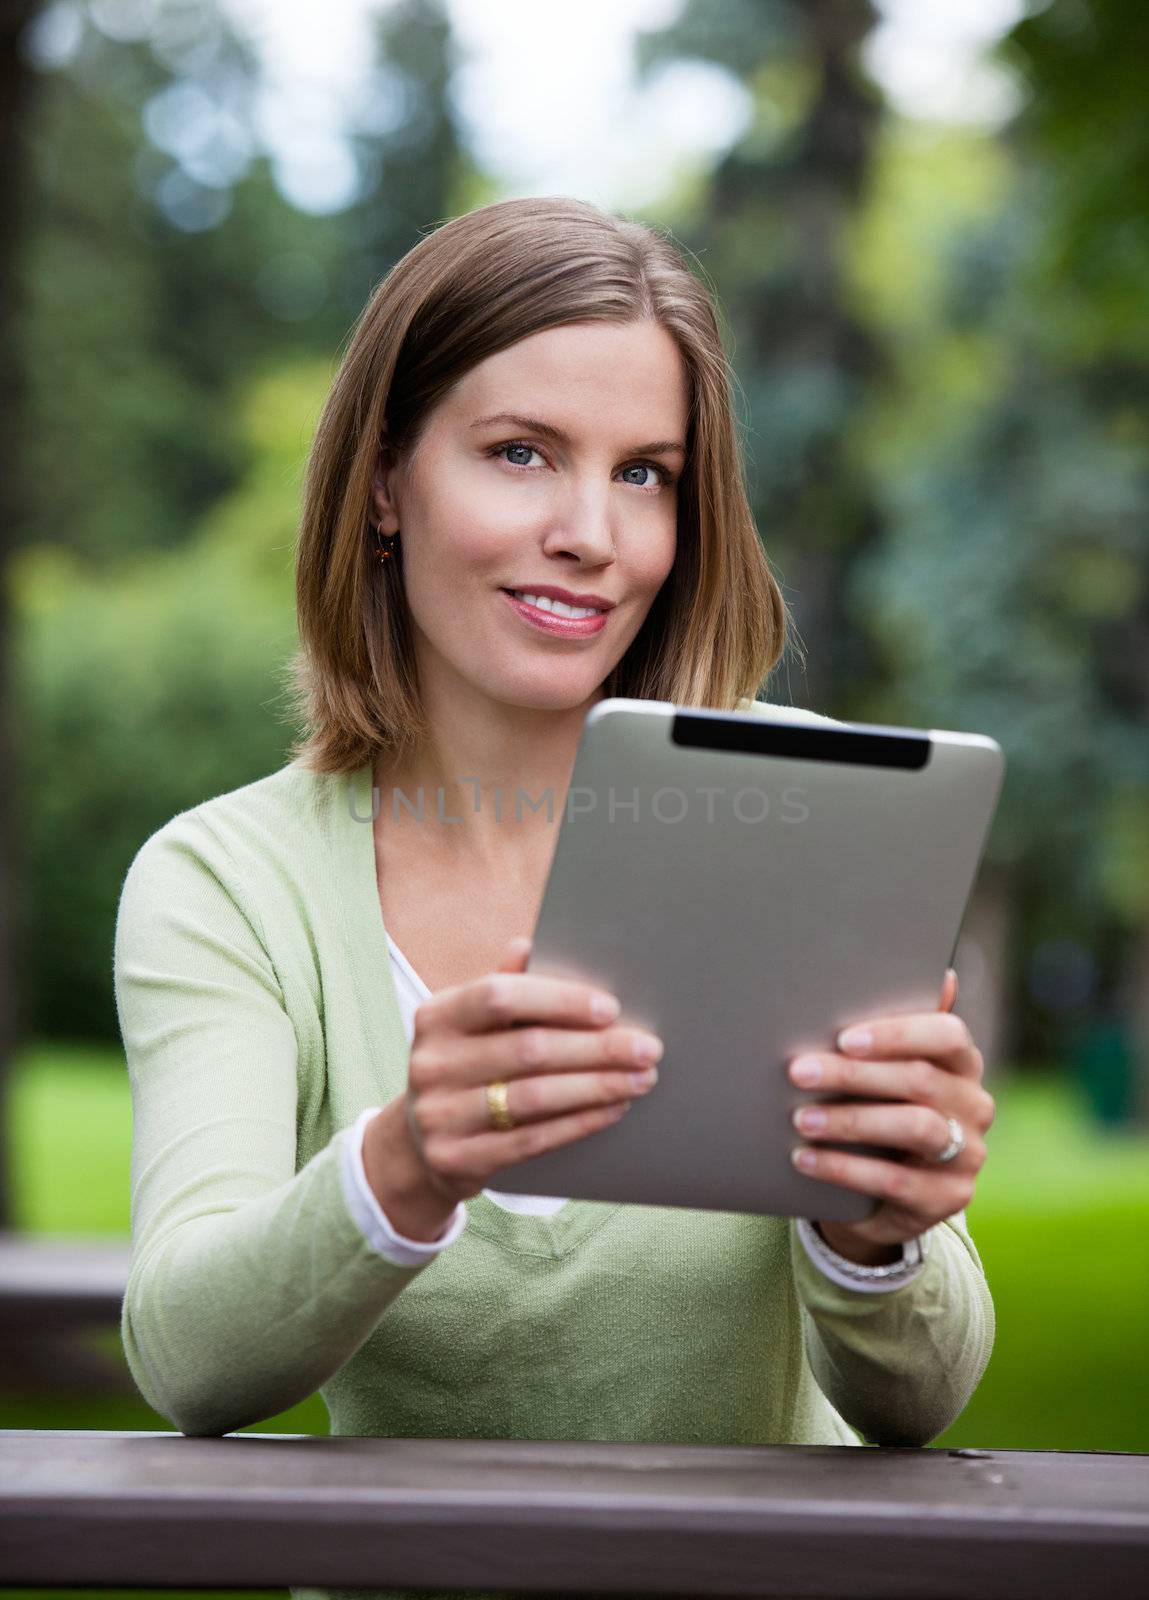 Woman in Park with Digital Tablet by leaf